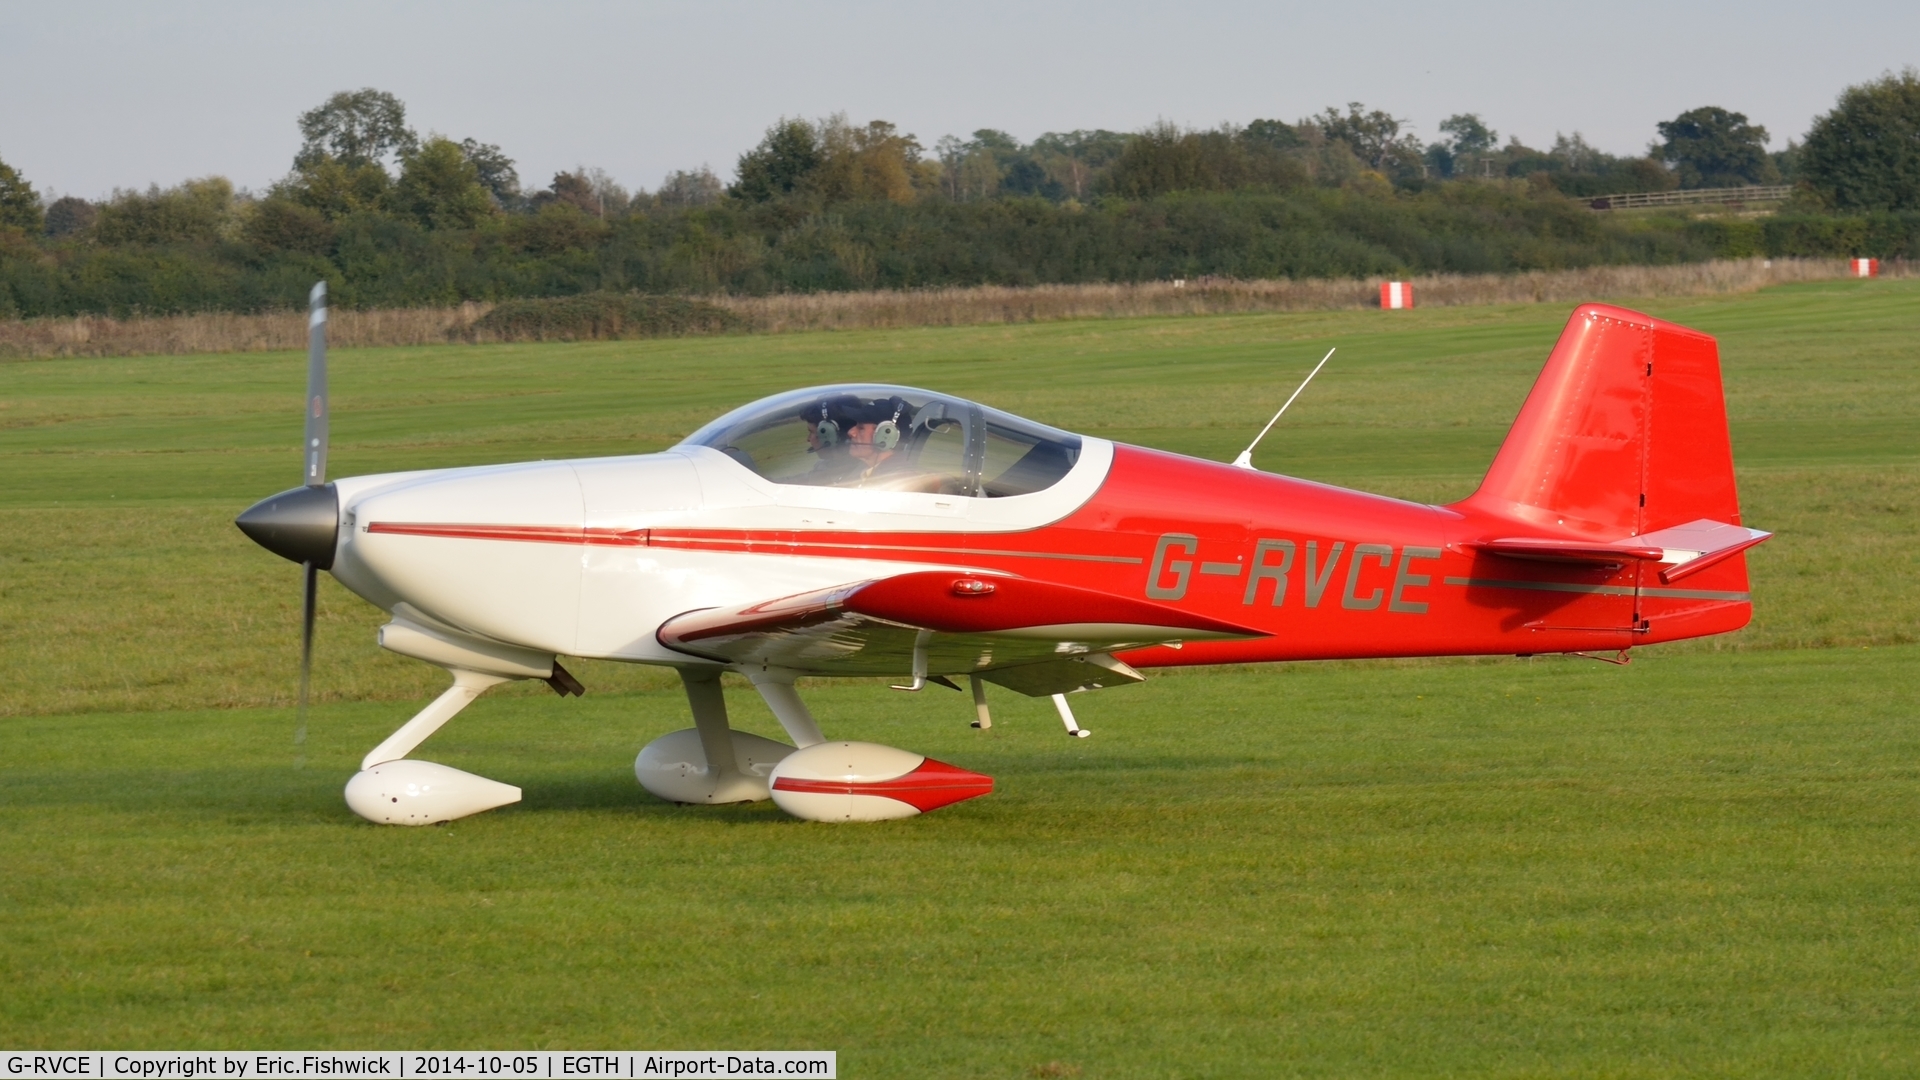 G-RVCE, 2001 Vans RV-6A C/N PFA 181-13372, 1. G-RVCE preparing to depart the rousing season finale Race Day Air Show at Shuttleworth, Oct. 2014.